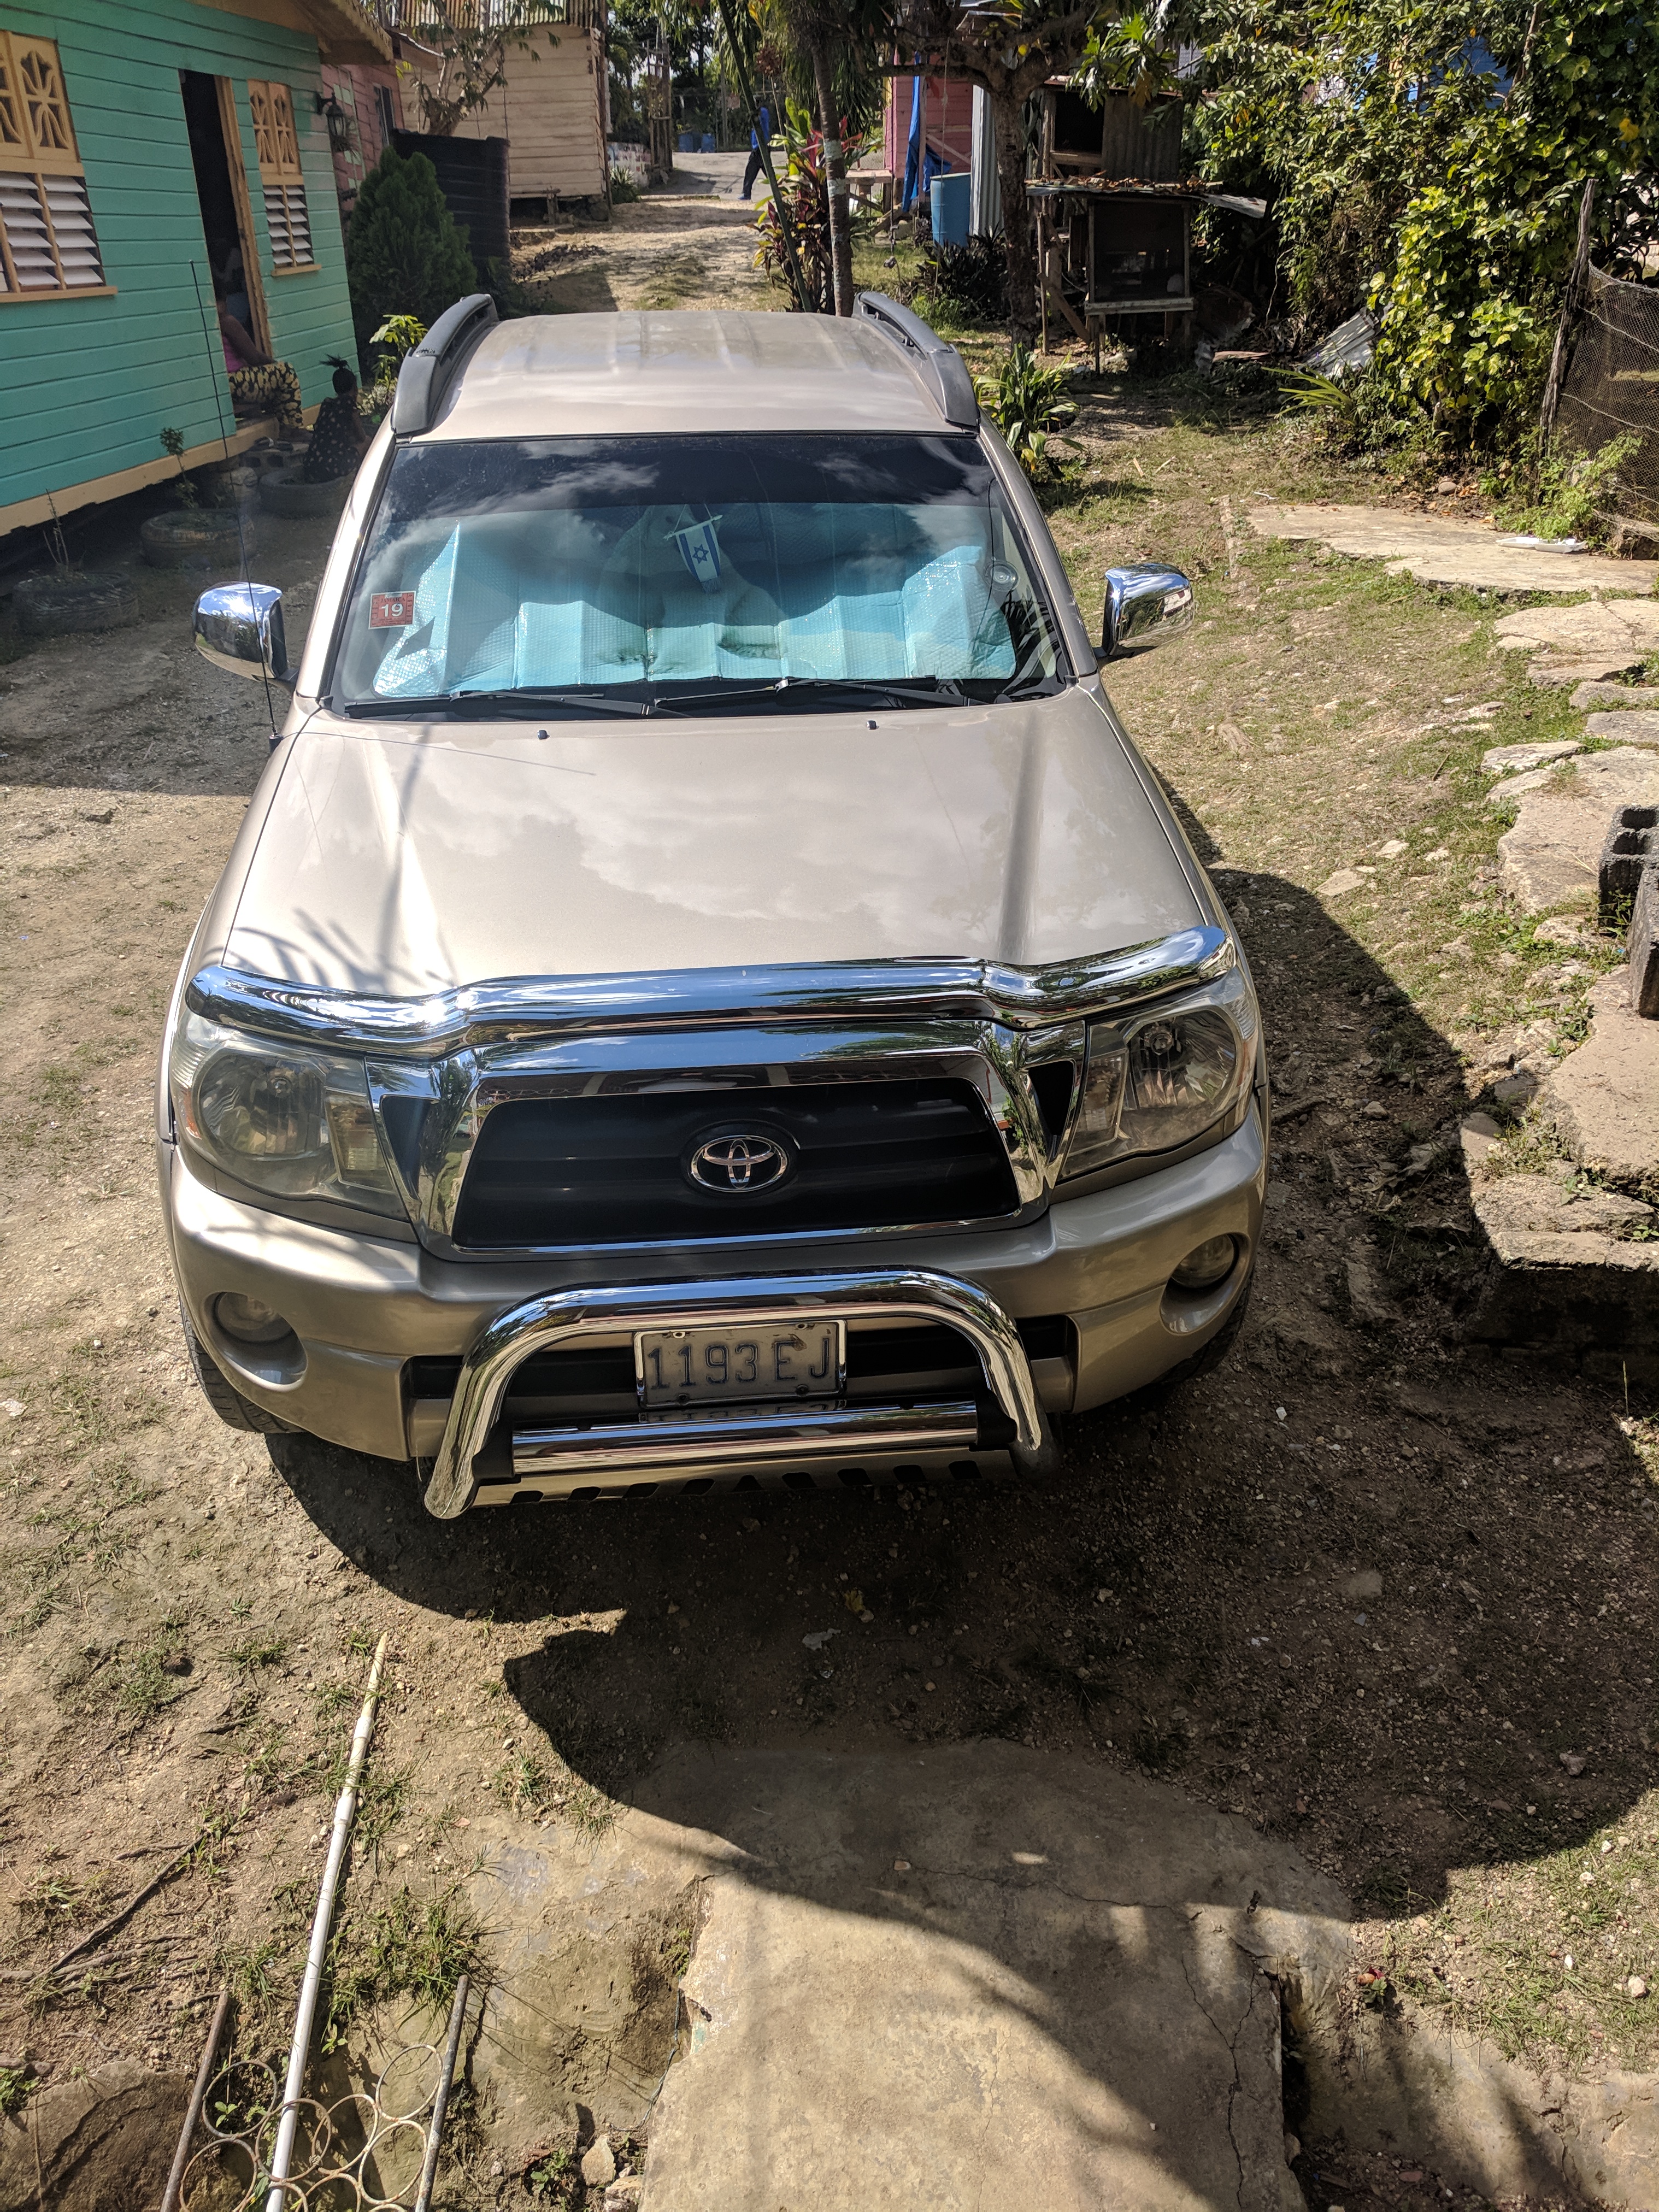 2007 Toyota Tacoma Pick Up For Sale